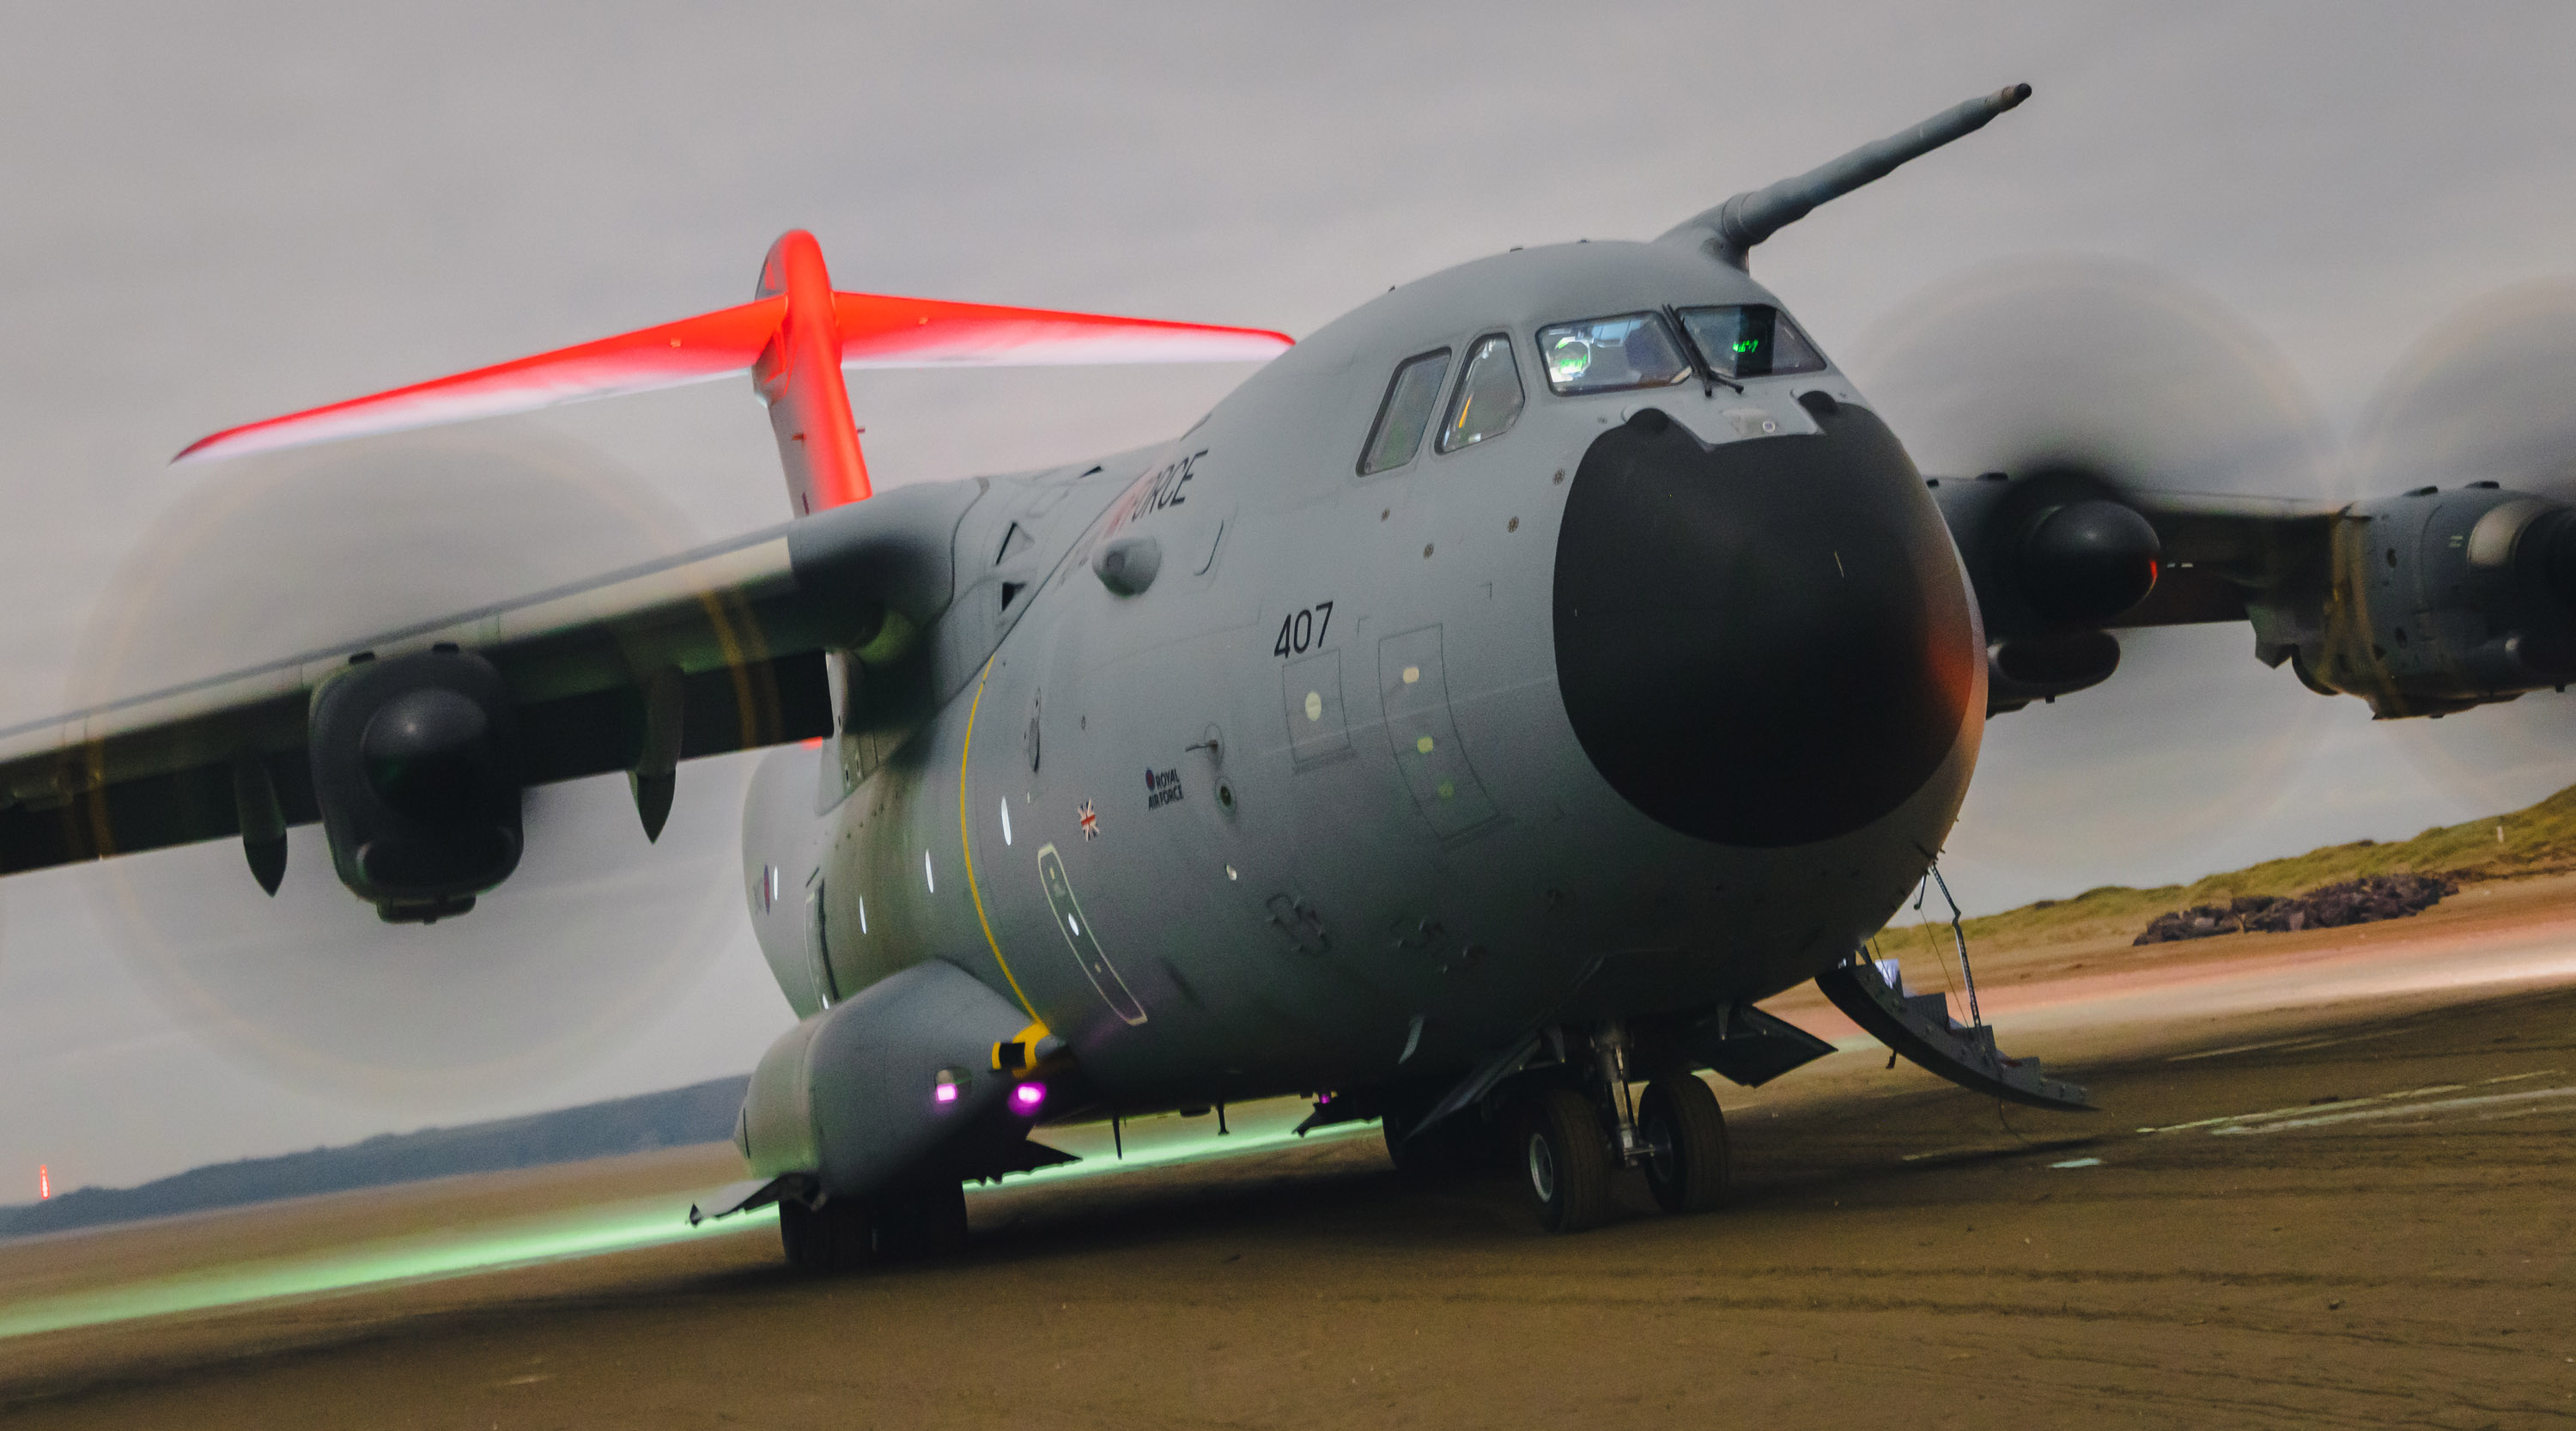 A400M Atlas C.1 and C-130J Hercules crews of the Air Mobility Force, based at RAF Brize Norton, have been working with Tactical Air Traffic Controllers as they hone their Natural Surface Operations skill set.